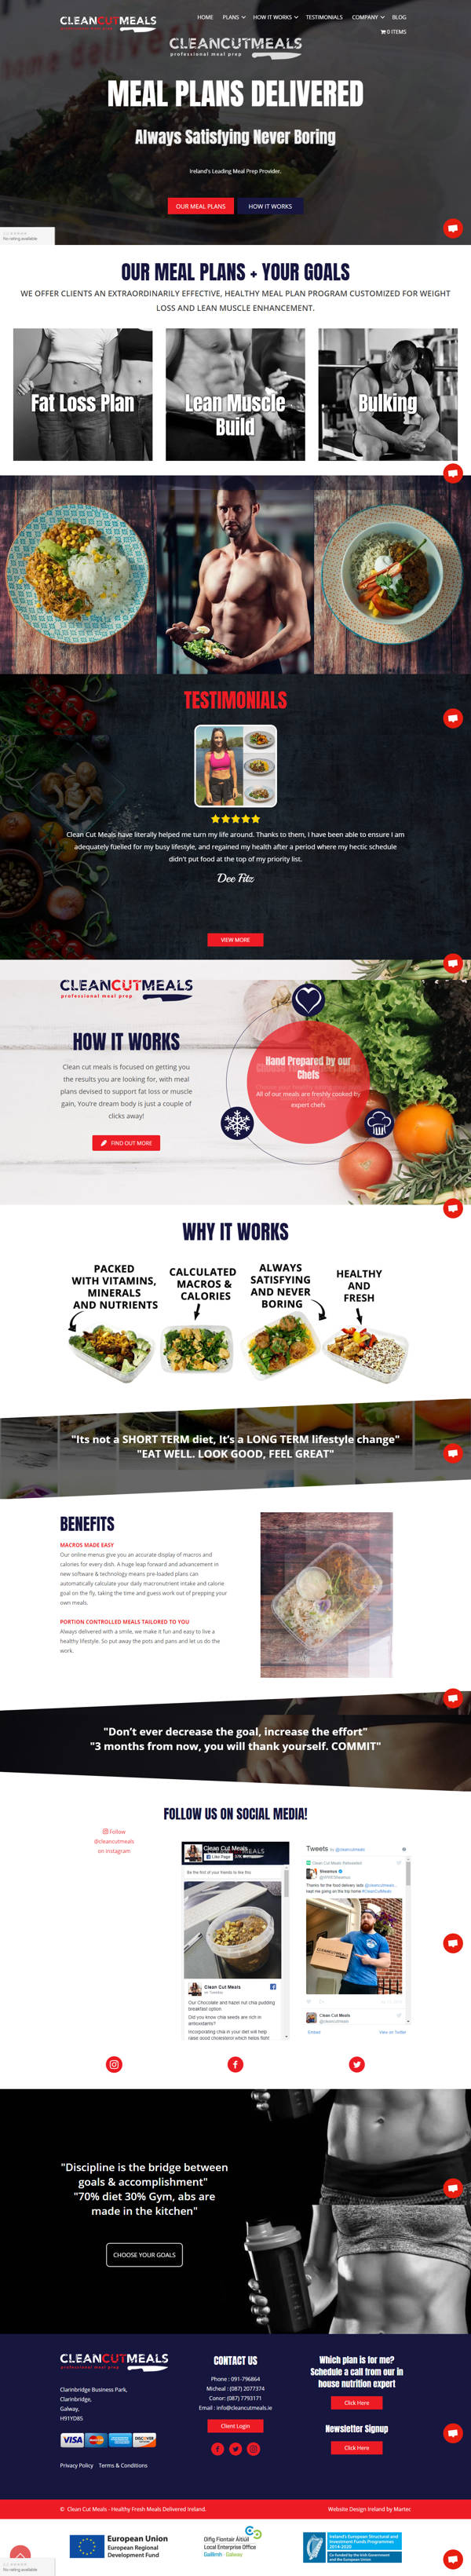 Clean Cut Meals – Healthy Fresh Meals Delivered Ireland